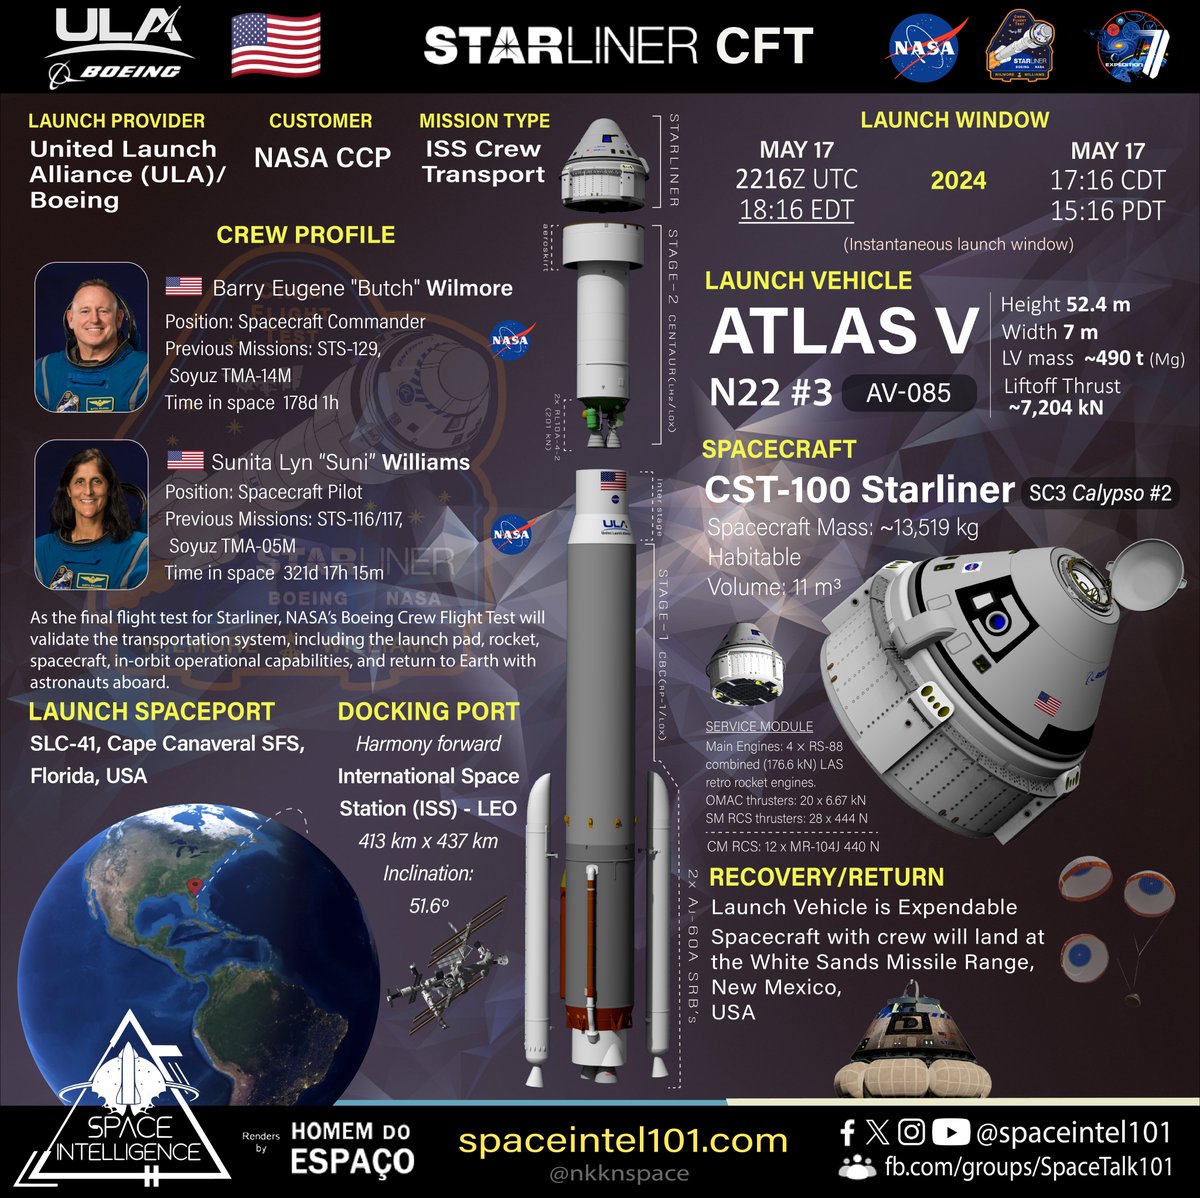 Orbital launch no. 93 of 2024 🇺🇸🚀👩🏻‍🚀👩🏻‍🚀

Starliner CFT | ULA | May 17 | 2216 UTC

Crew launch no. 5 of 2024 🇺🇲 
@ulalaunch to launch @BoeingSpace's CST-100 #Starliner named S3 Calypso on its first Crewed Flight Test #CFT to the @Space_Station atop #AtlasV N22🚀 from @SLDelta45 SLC…